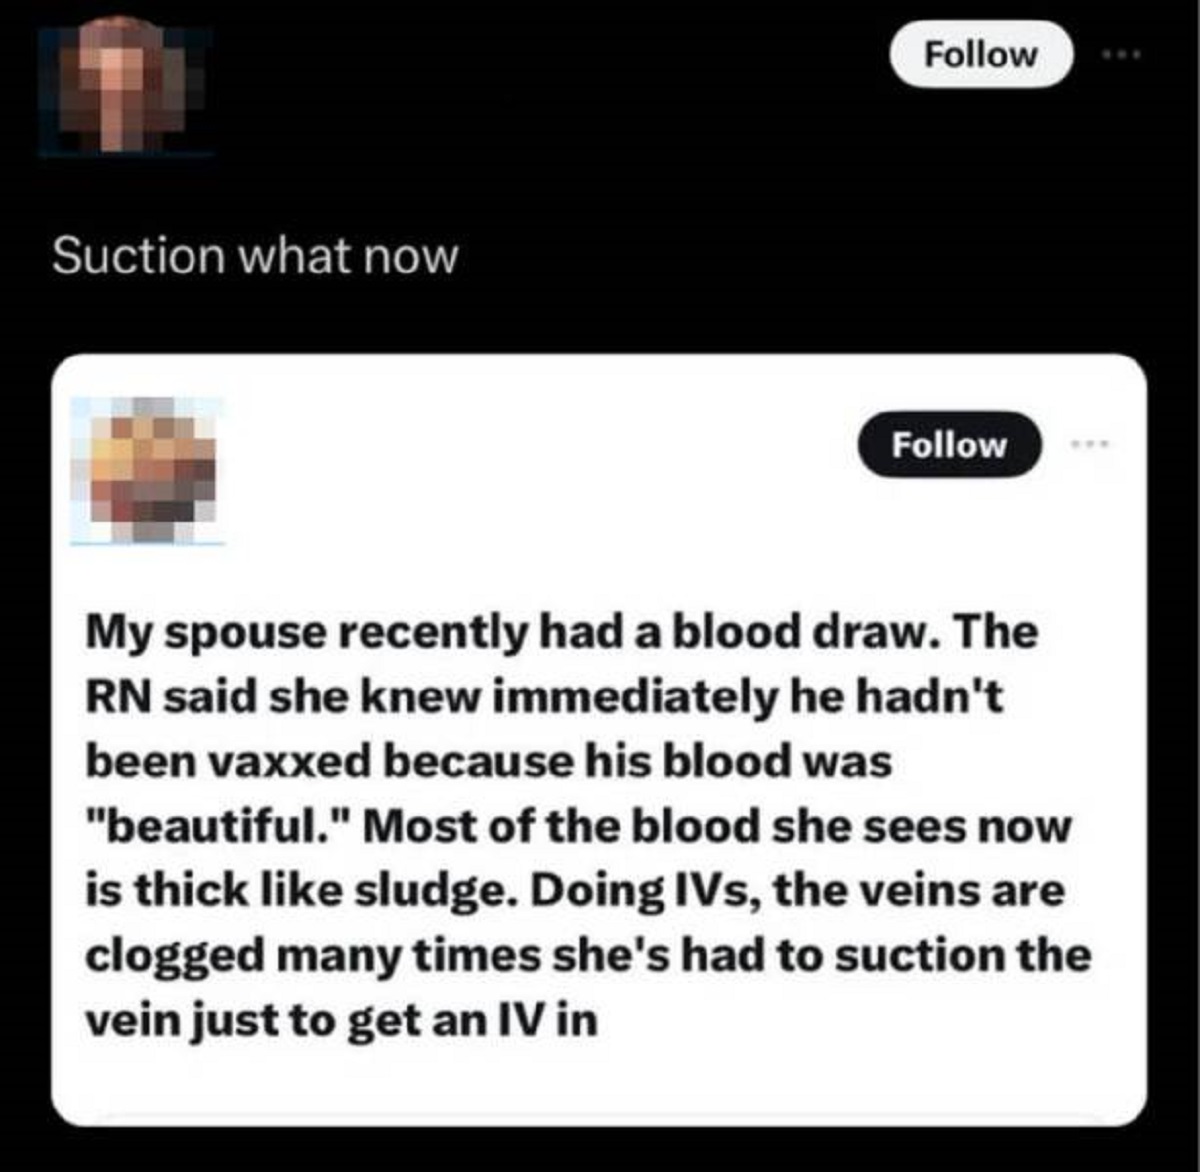 screenshot - Suction what now My spouse recently had a blood draw. The Rn said she knew immediately he hadn't been vaxxed because his blood was "beautiful." Most of the blood she sees now is thick sludge. Doing IVs, the veins are clogged many times she's 